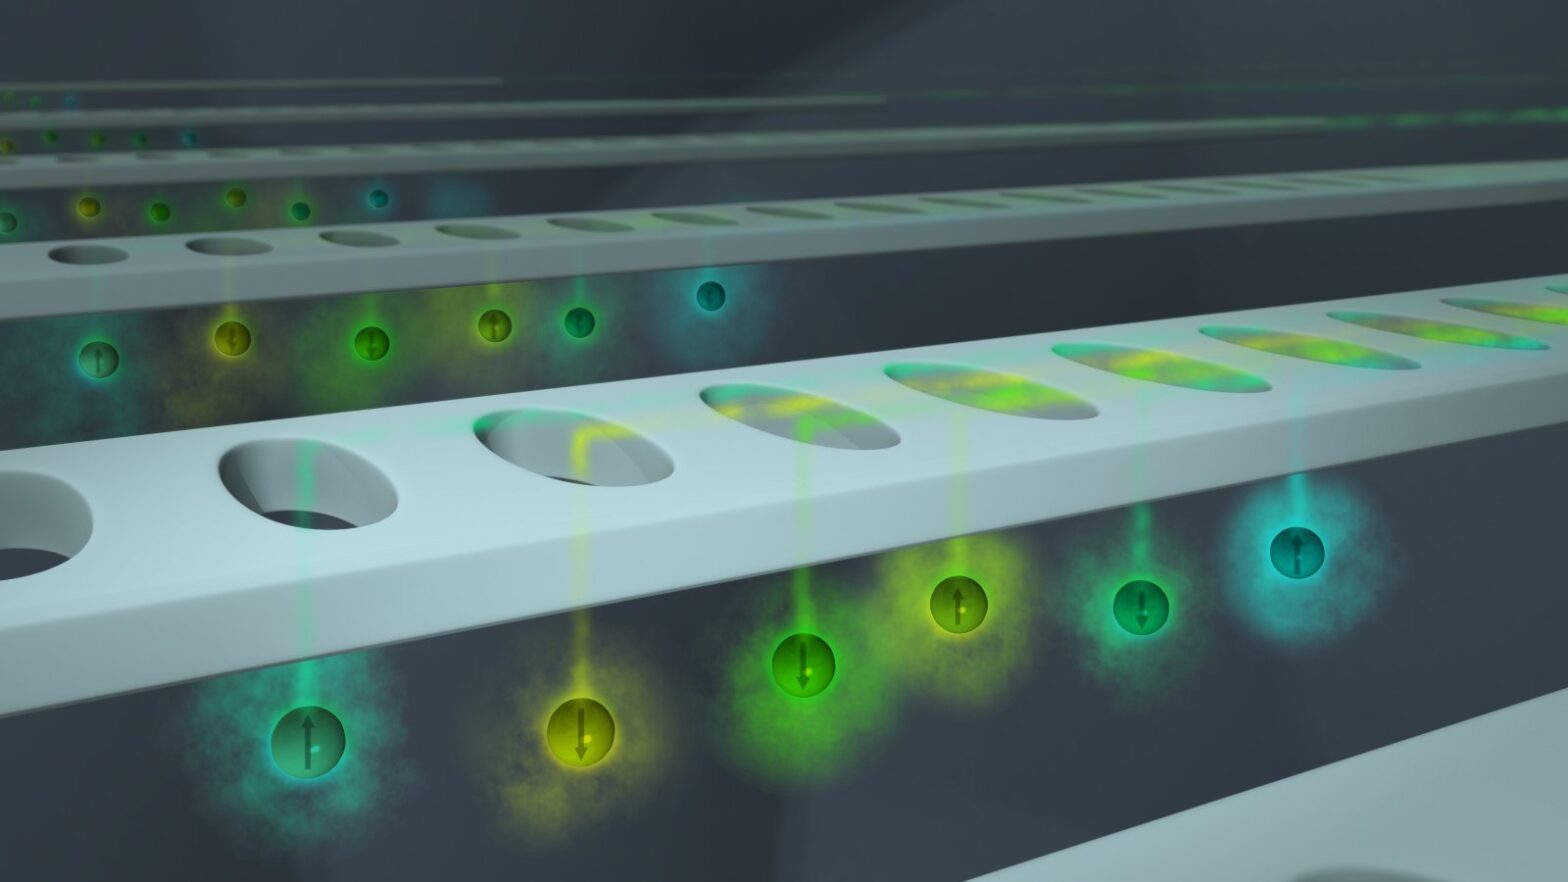 waveguides direct colored light from individual atoms toward a detector